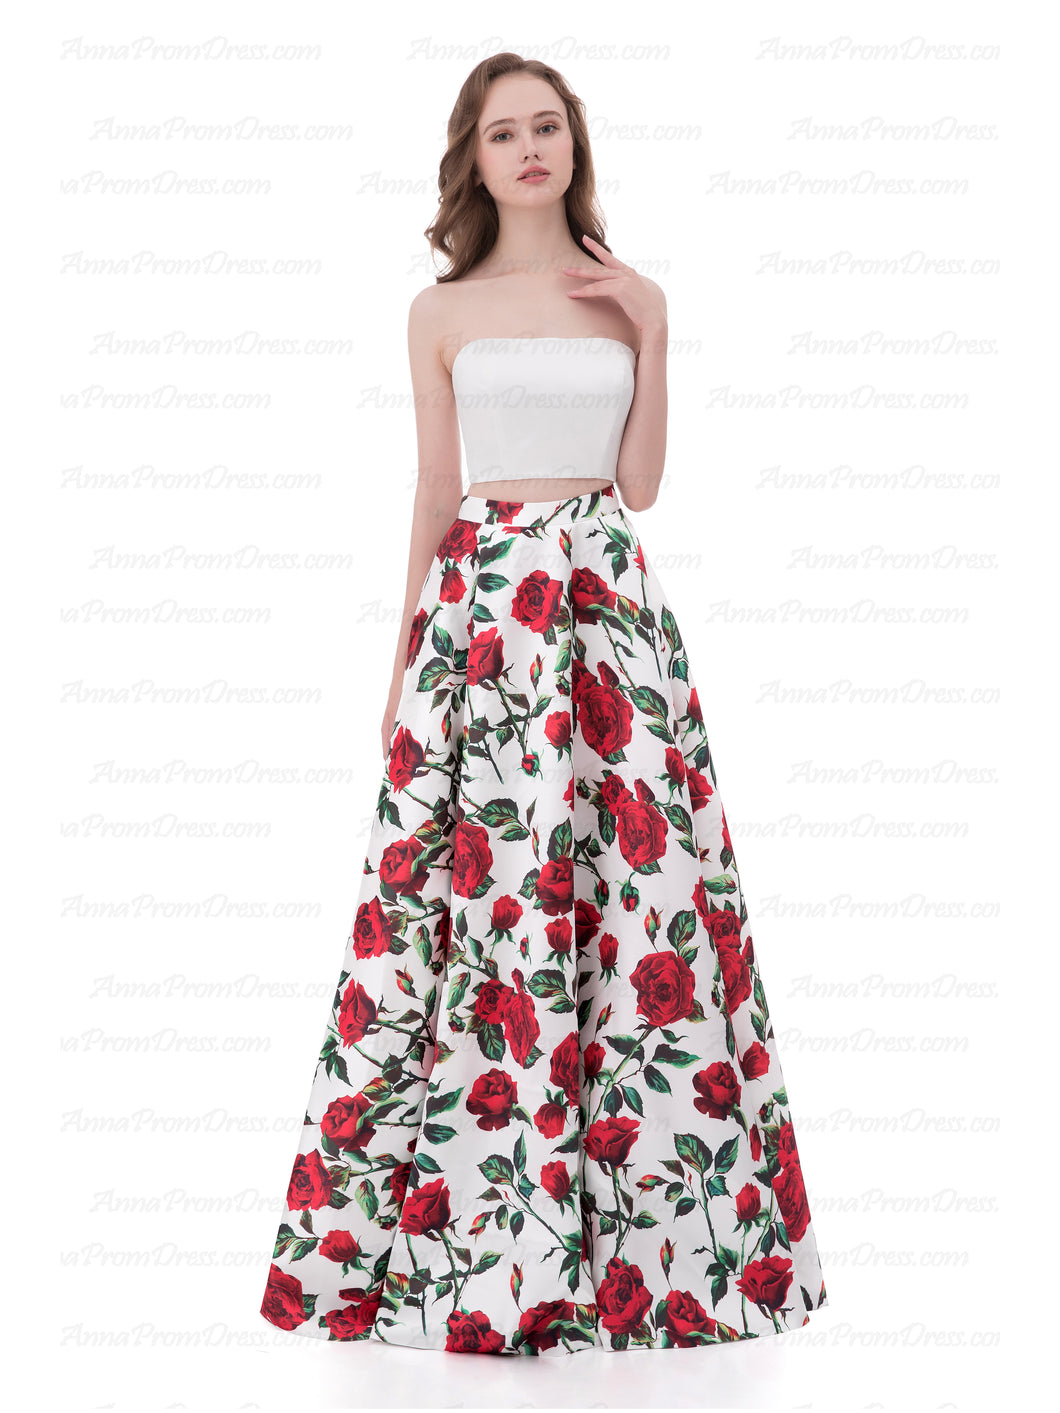 Two Piece Prom Dresses A-line Strapless Floor-length Floral Print Long Prom Dress AX004